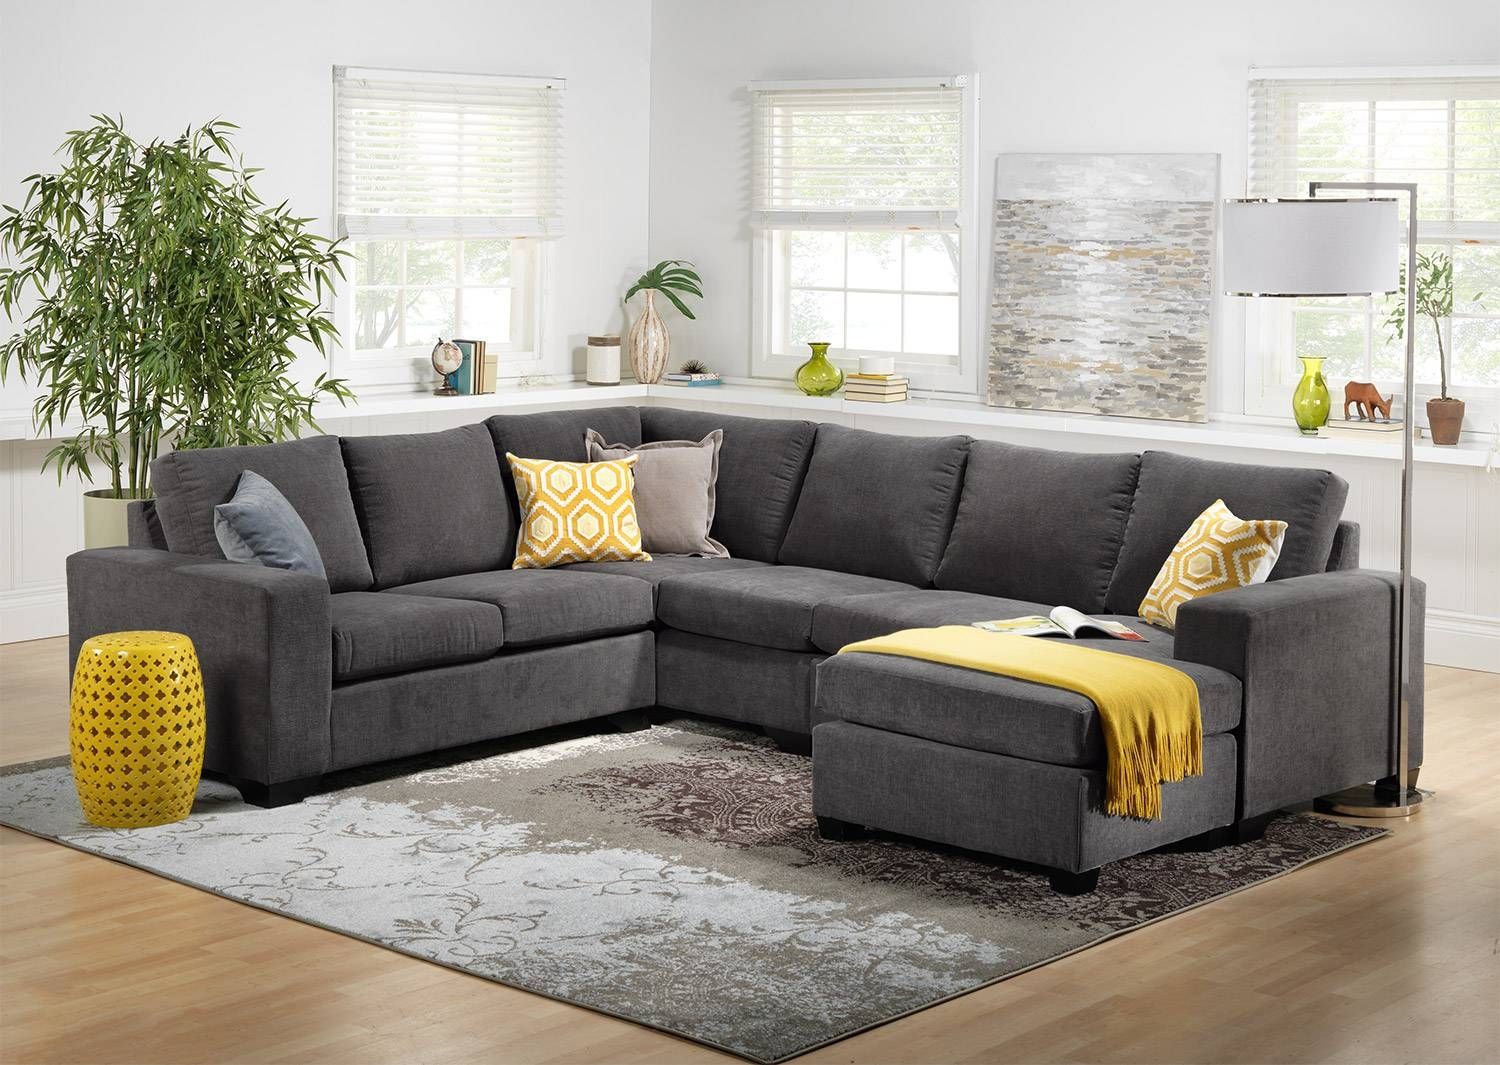 Stunning Cozy Sectional Sofas 58 For Your Couch Cover For Throughout Cozy Sectional Sofas (Photo 27 of 30)